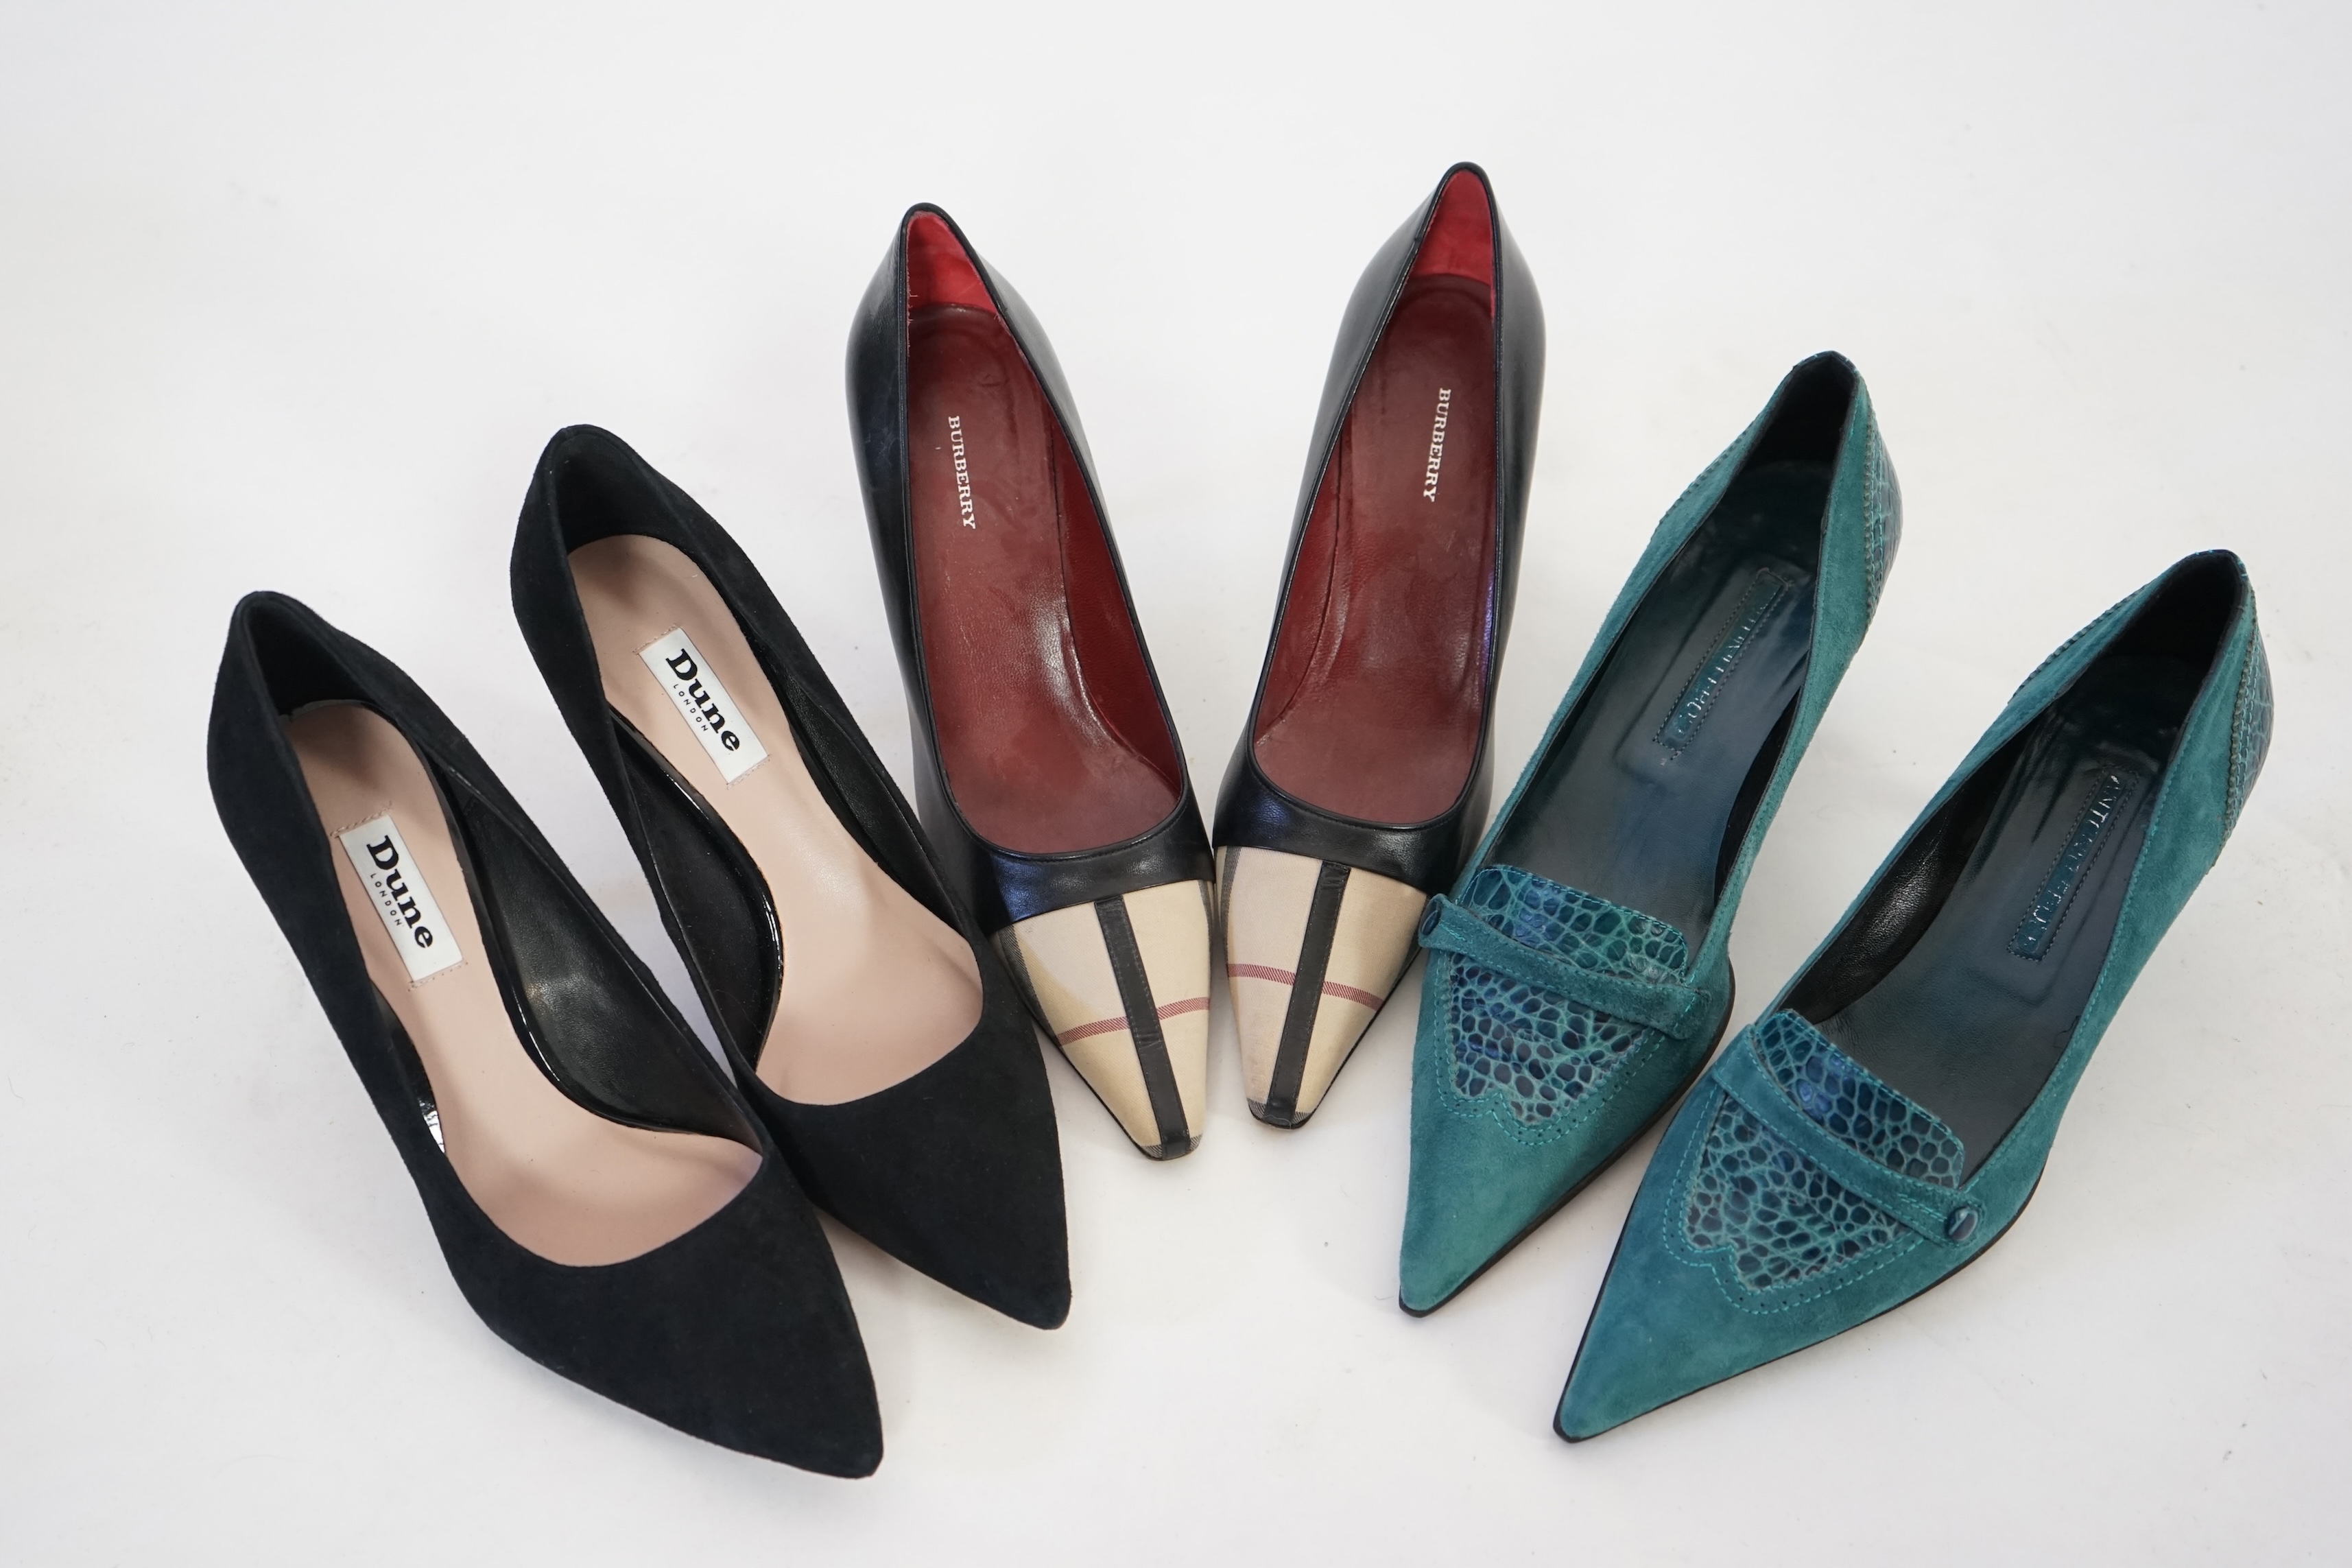 A pair of Burberry lady's black heeled pumps with tartan canvas toe detail, a pair of unworn Dune black suede heeled pumps, a pair of teal suede and mock croc leather detail kitten heeled pumps. Three pairs in total. Siz